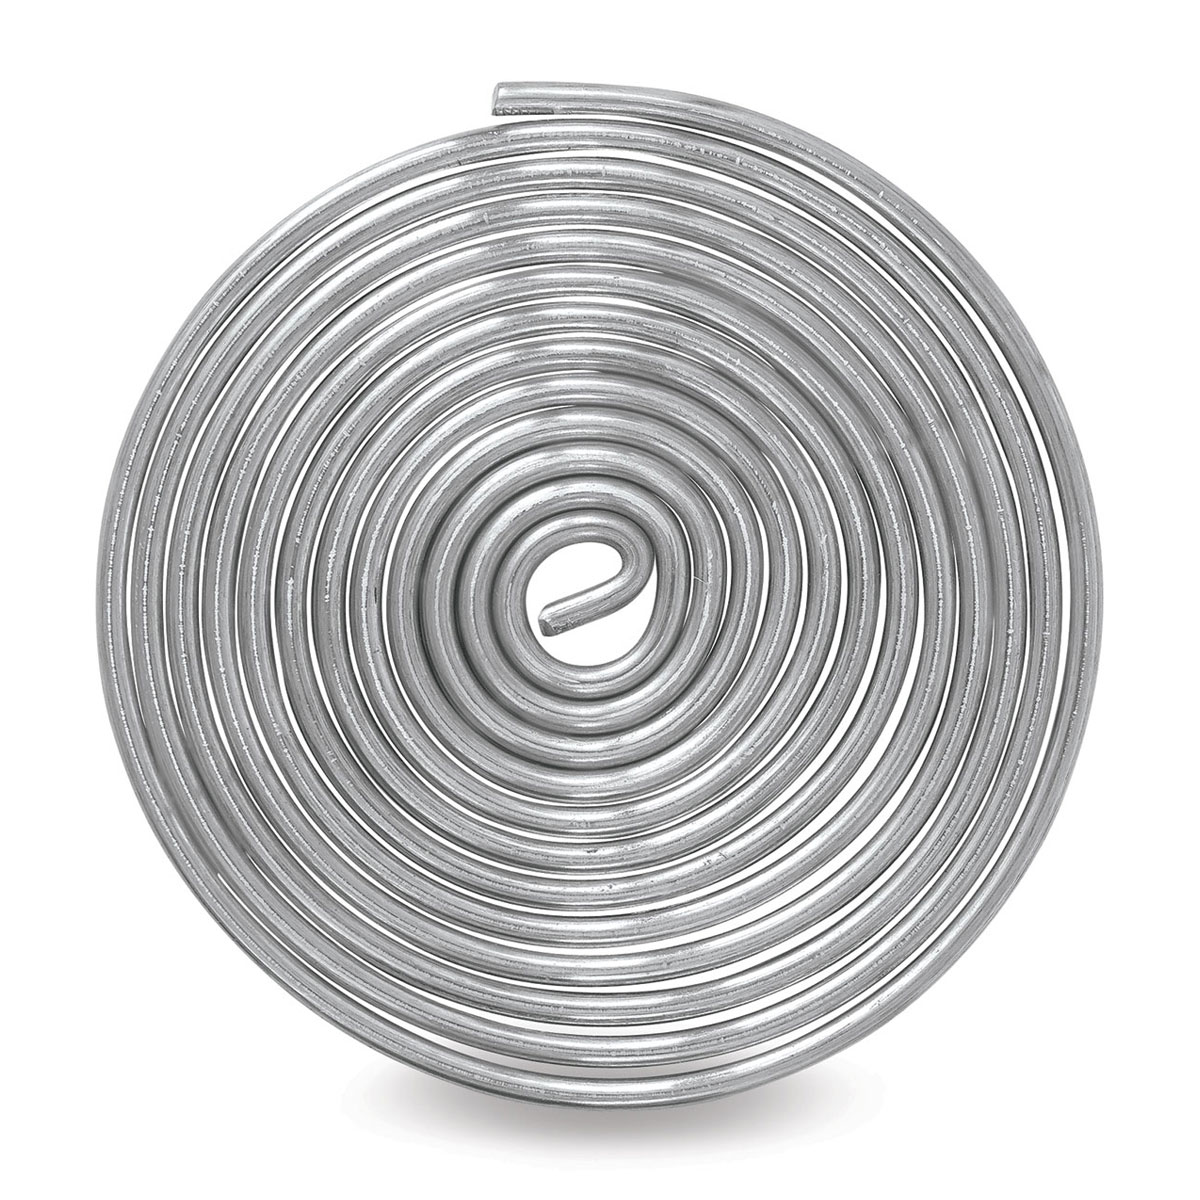 Richeson Armature Wire - 6 Gauge, 10 ft roll